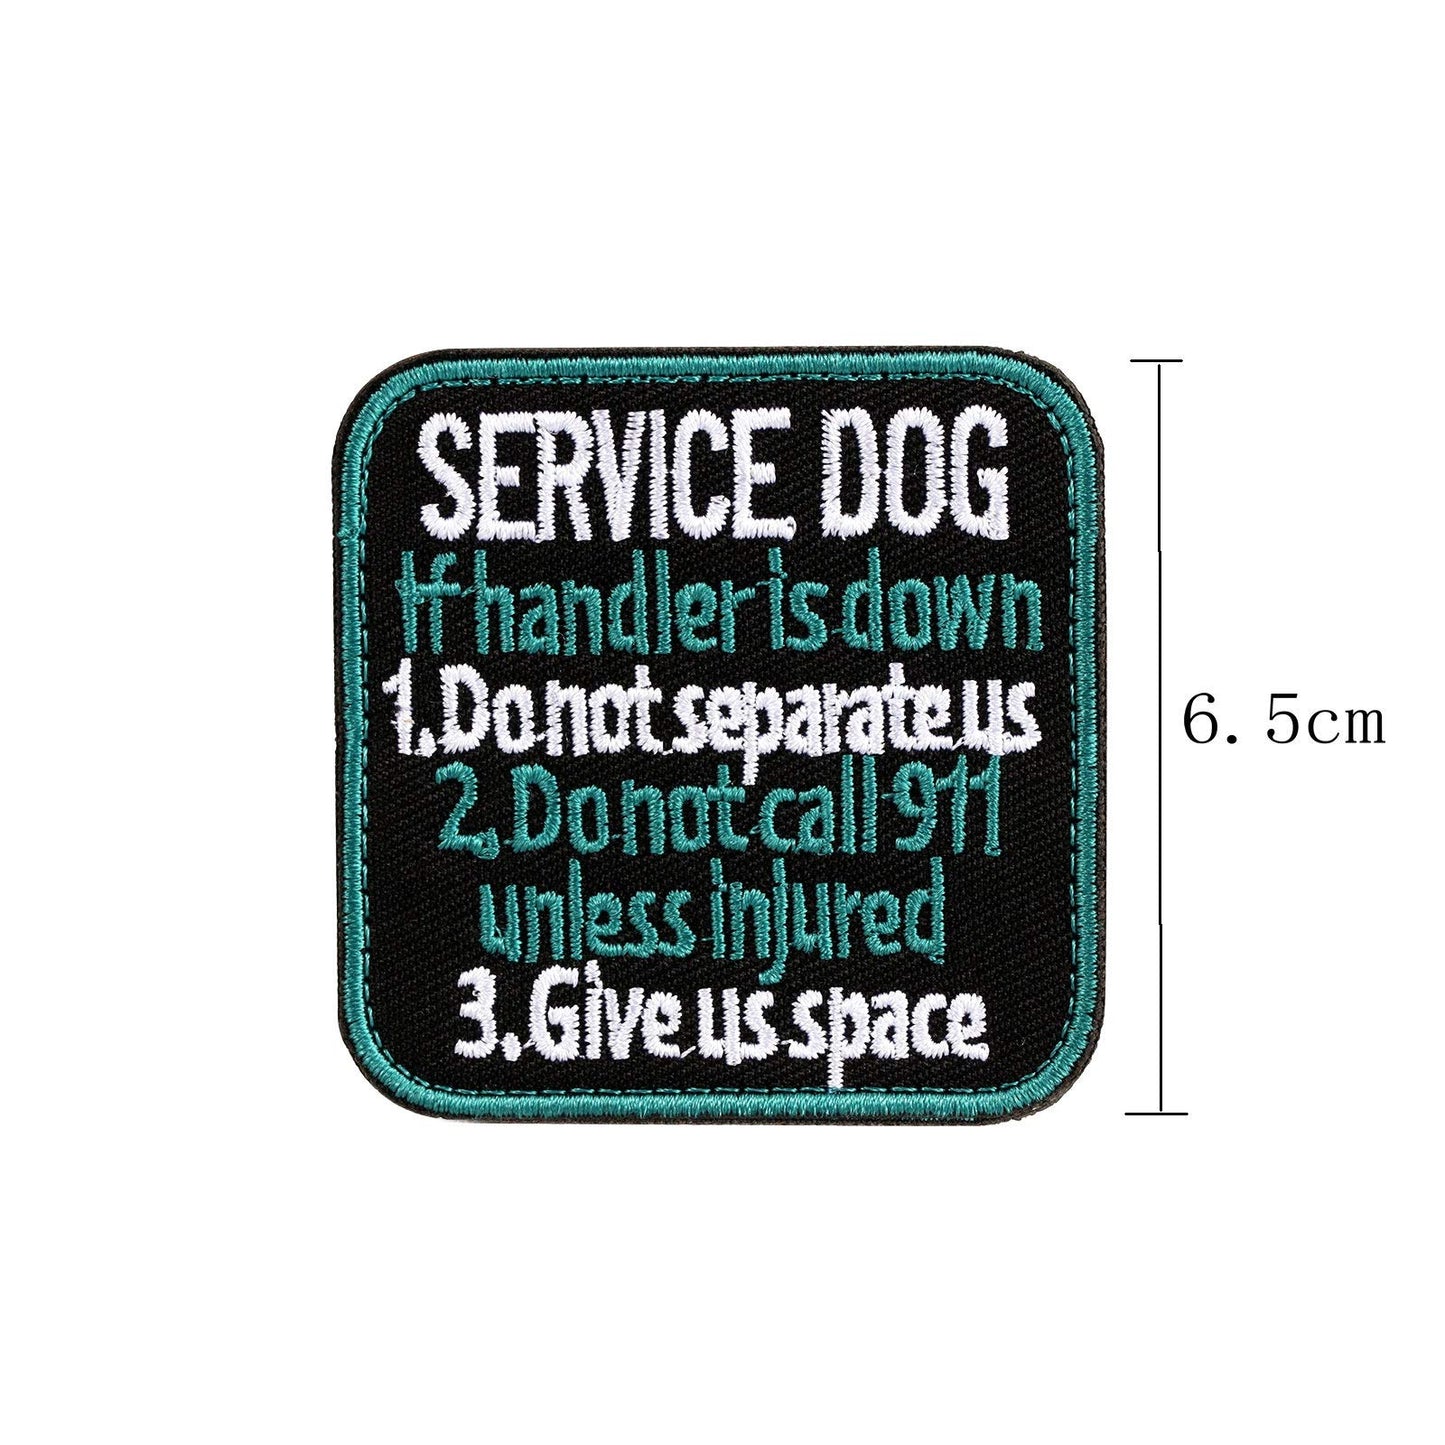 Vevins Service Dog Vest Patches - K9 in Training Hook and Loop Tag - Embroidered Morale Patches for Tactiacl Dog Harness Backpack